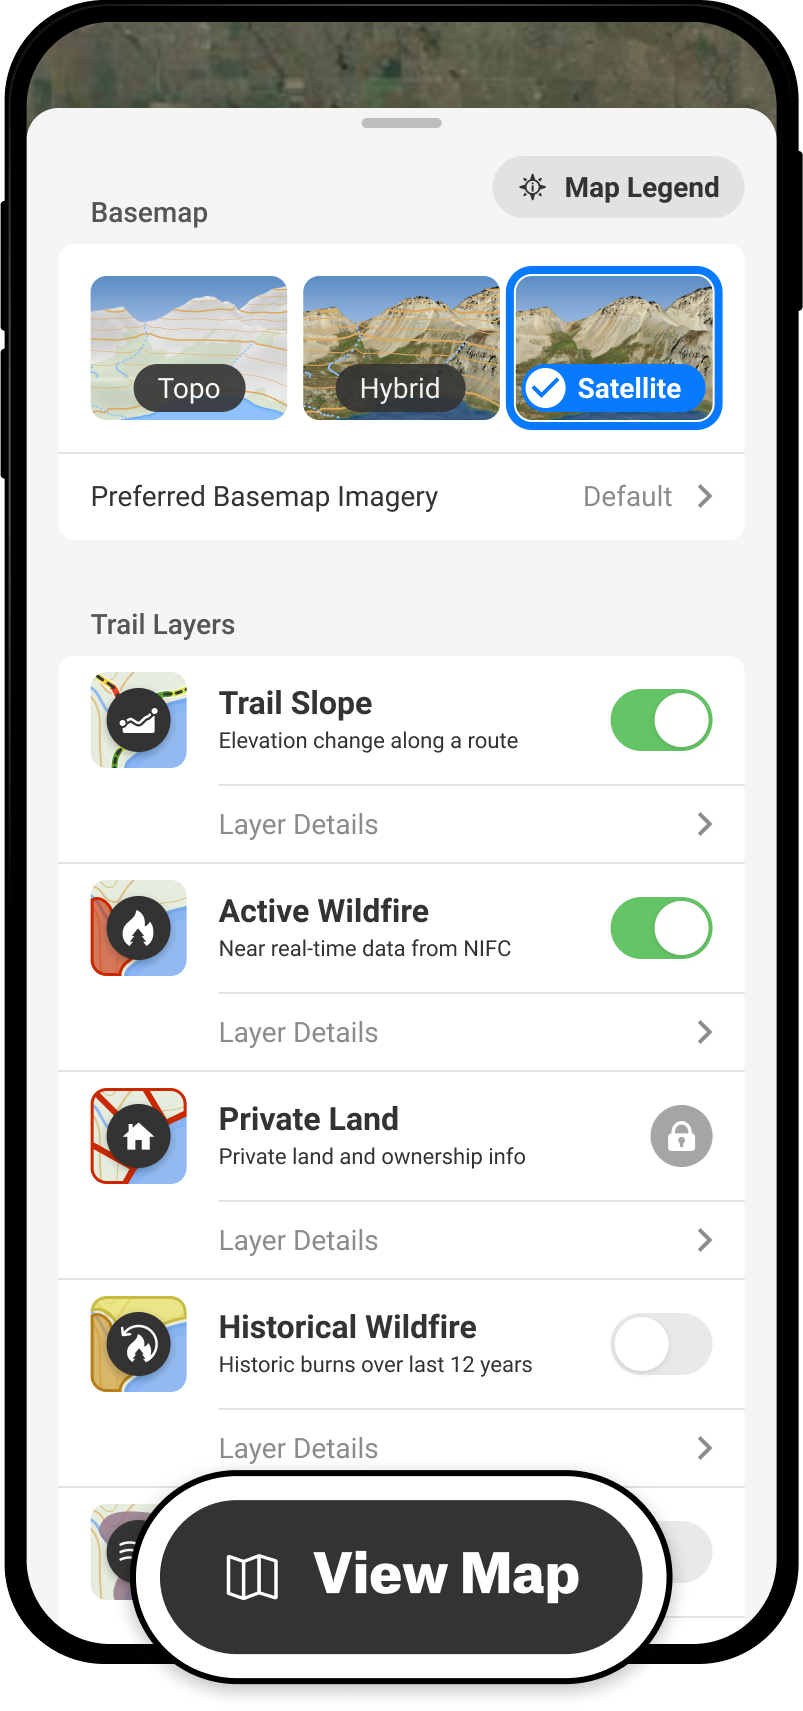 View Map Map Layers and Basemaps Menu Backcountry App.png